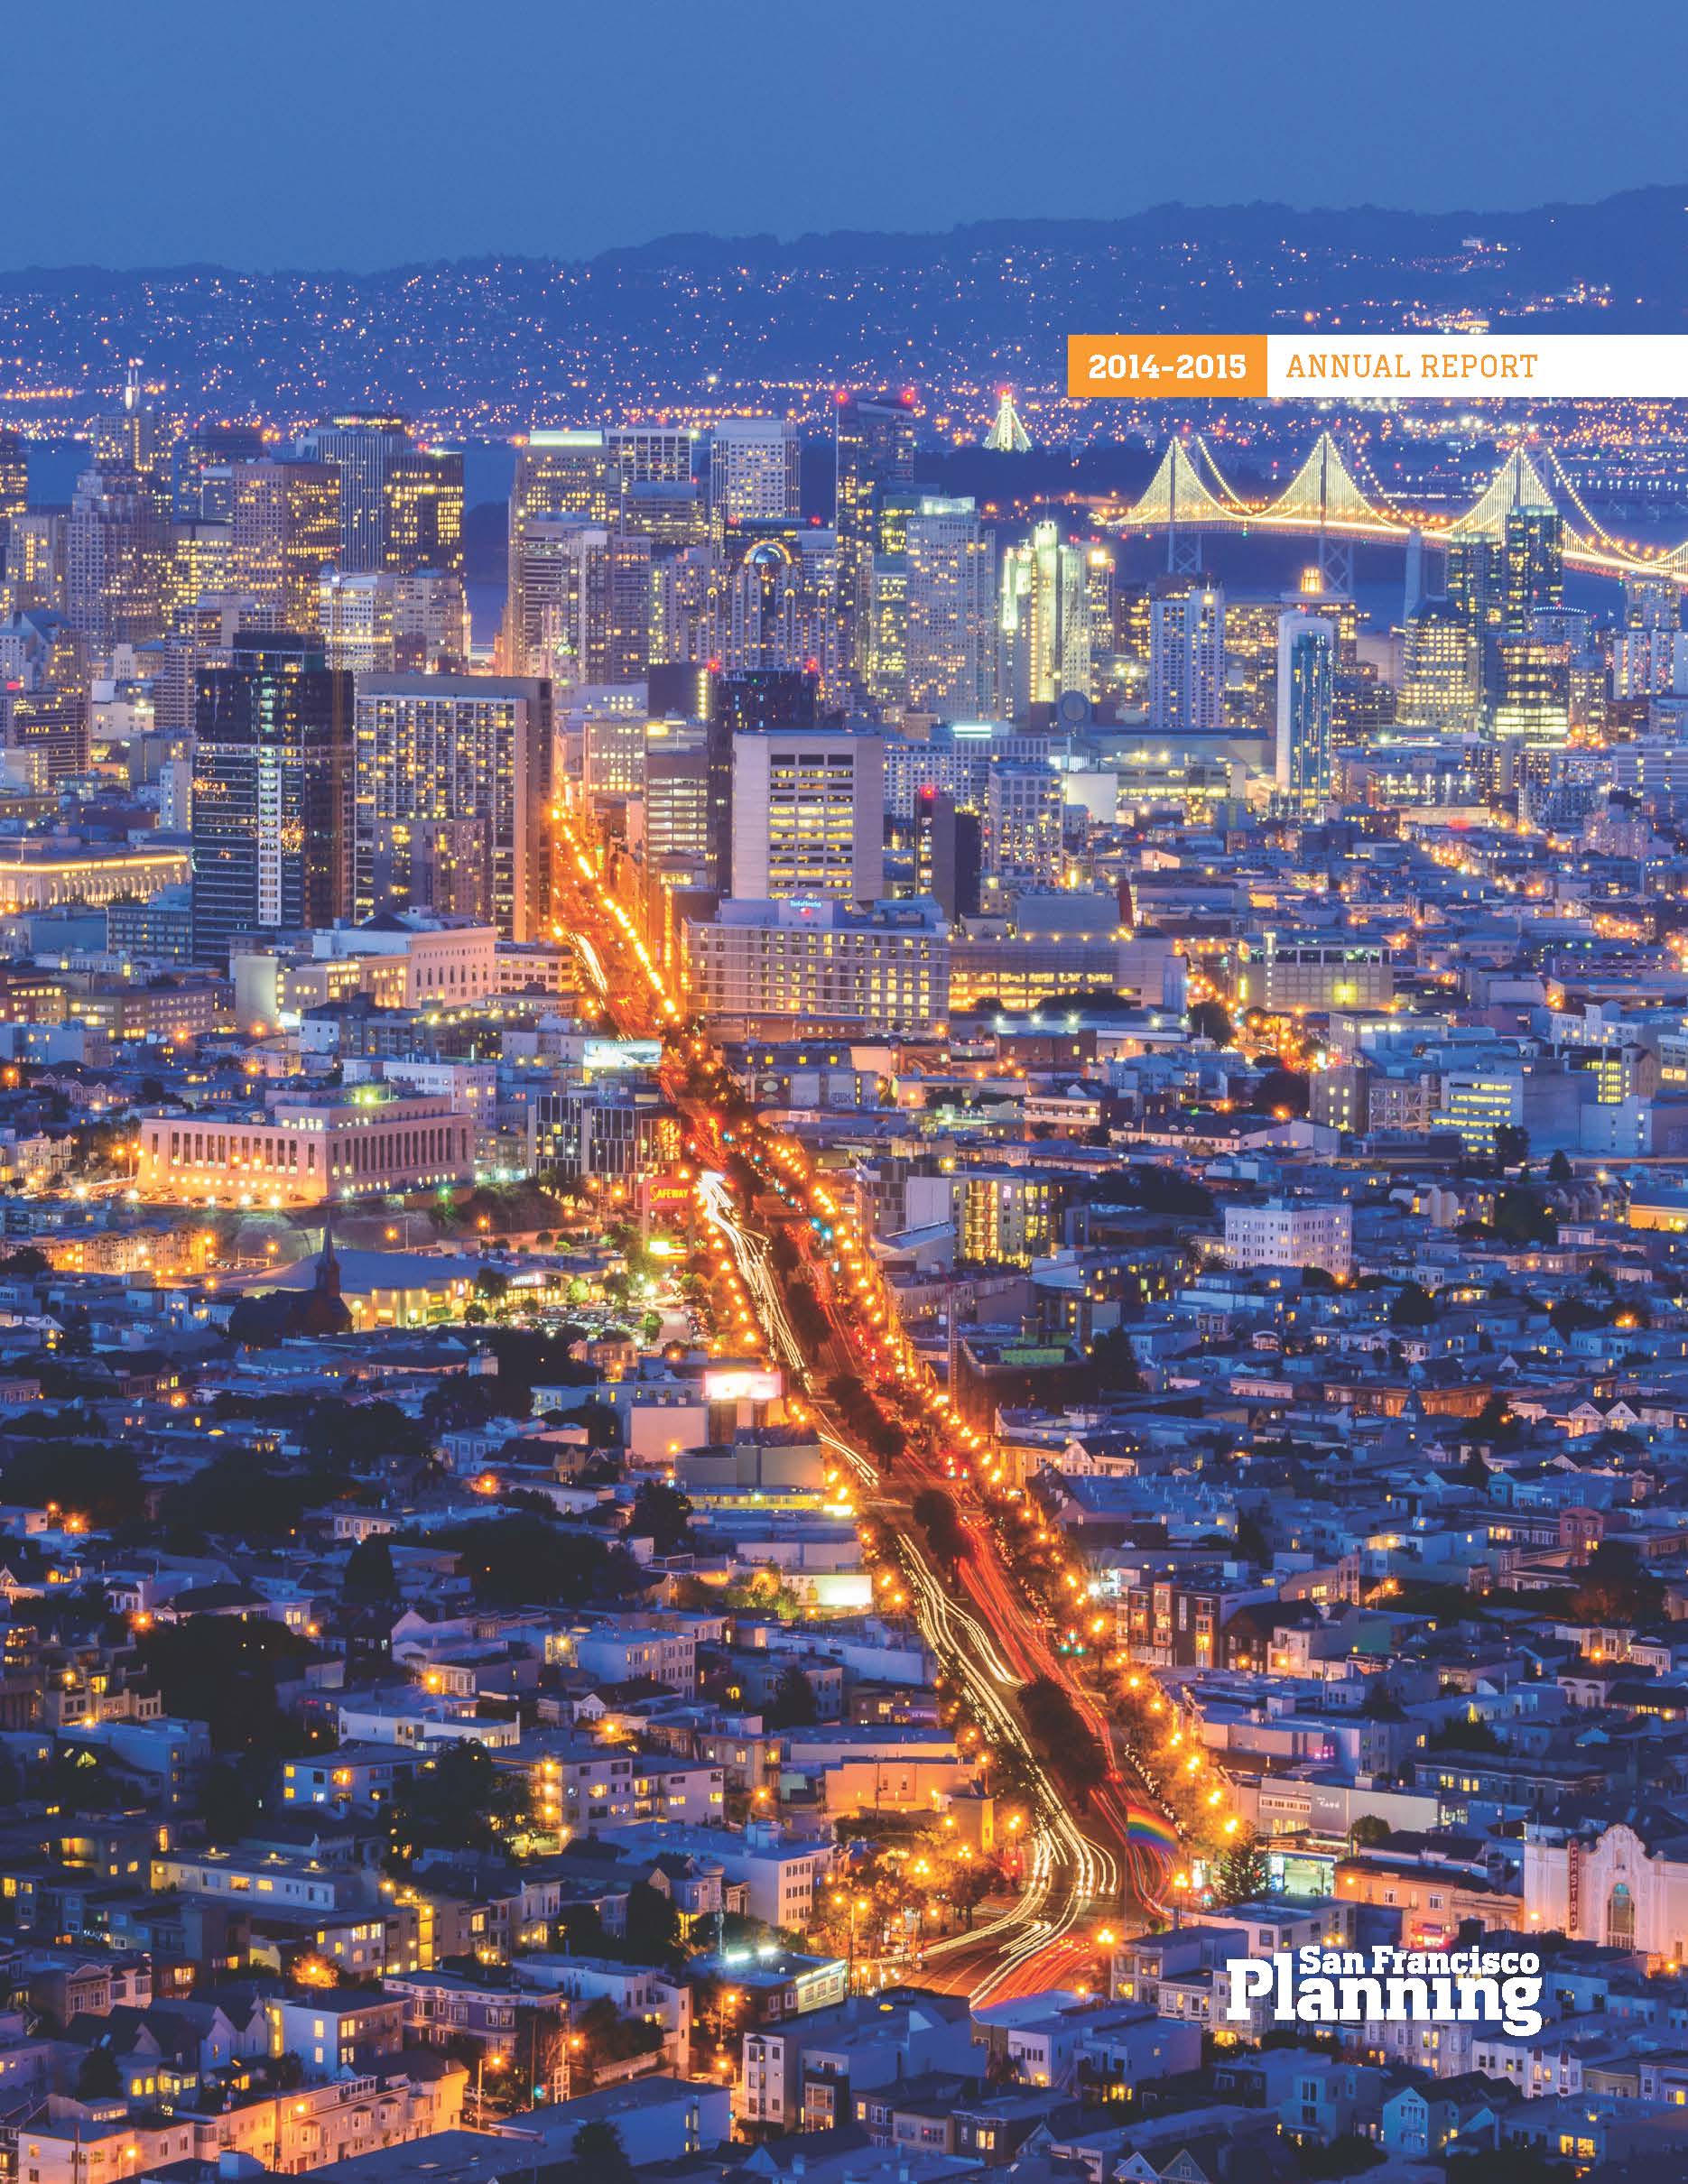 Cover Image of Market Street in the Evening for Planning's Annual Report